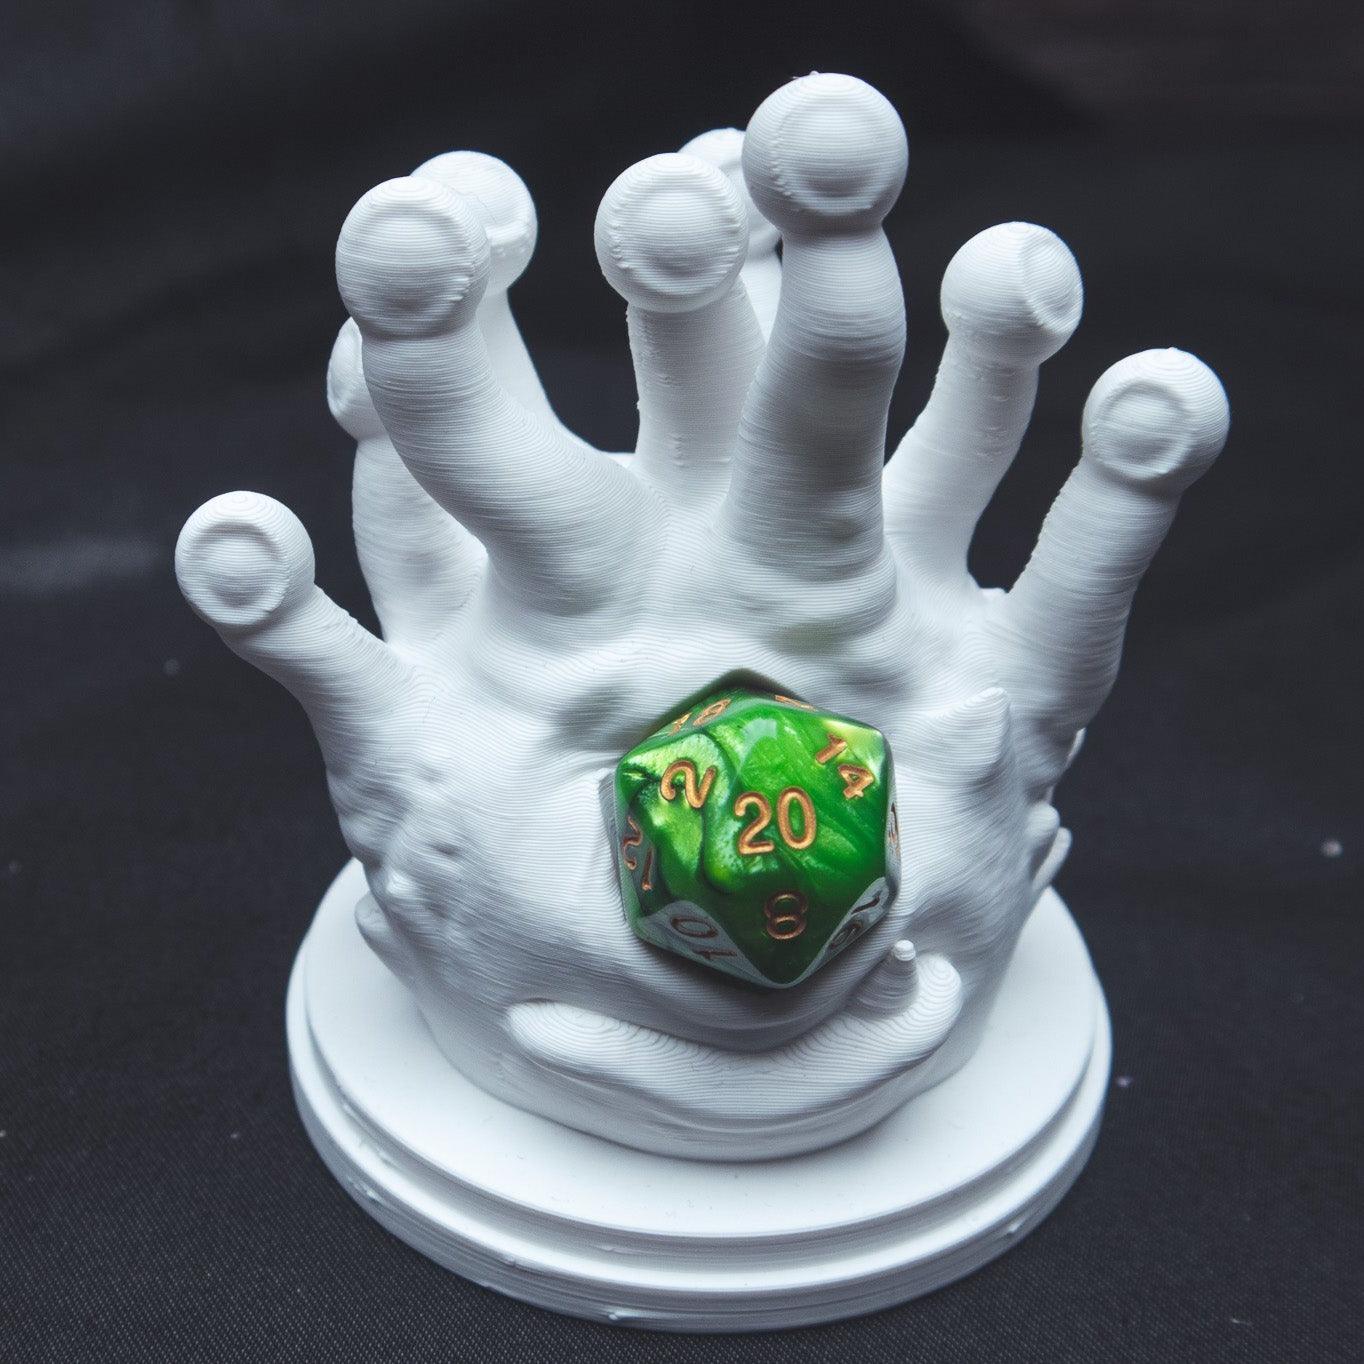 Beholder dice guardian - The Flaming Feather & Flaming Filament